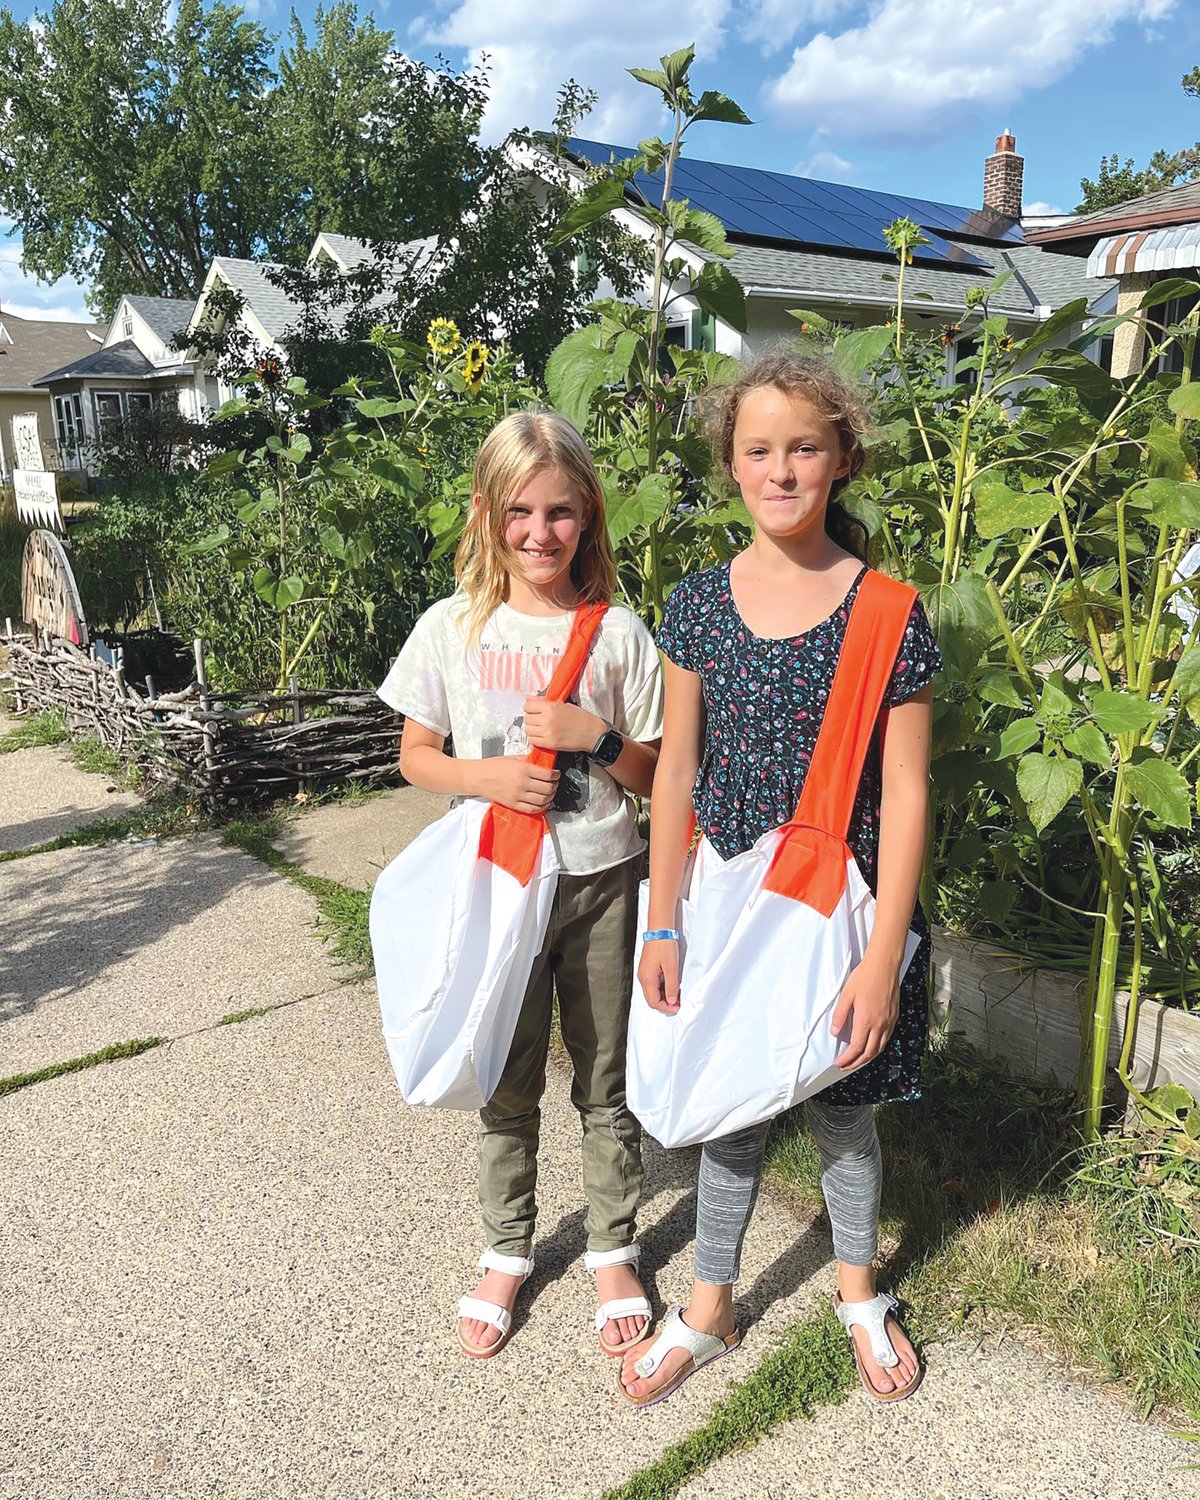 Audrey Young (left) and Annika Lindorfer, both age 10, are two new carriers for the Longfellow Nokomis Messenger. They said it is calming to walk around and see different parts of the neighborhood. (Photo submitted)